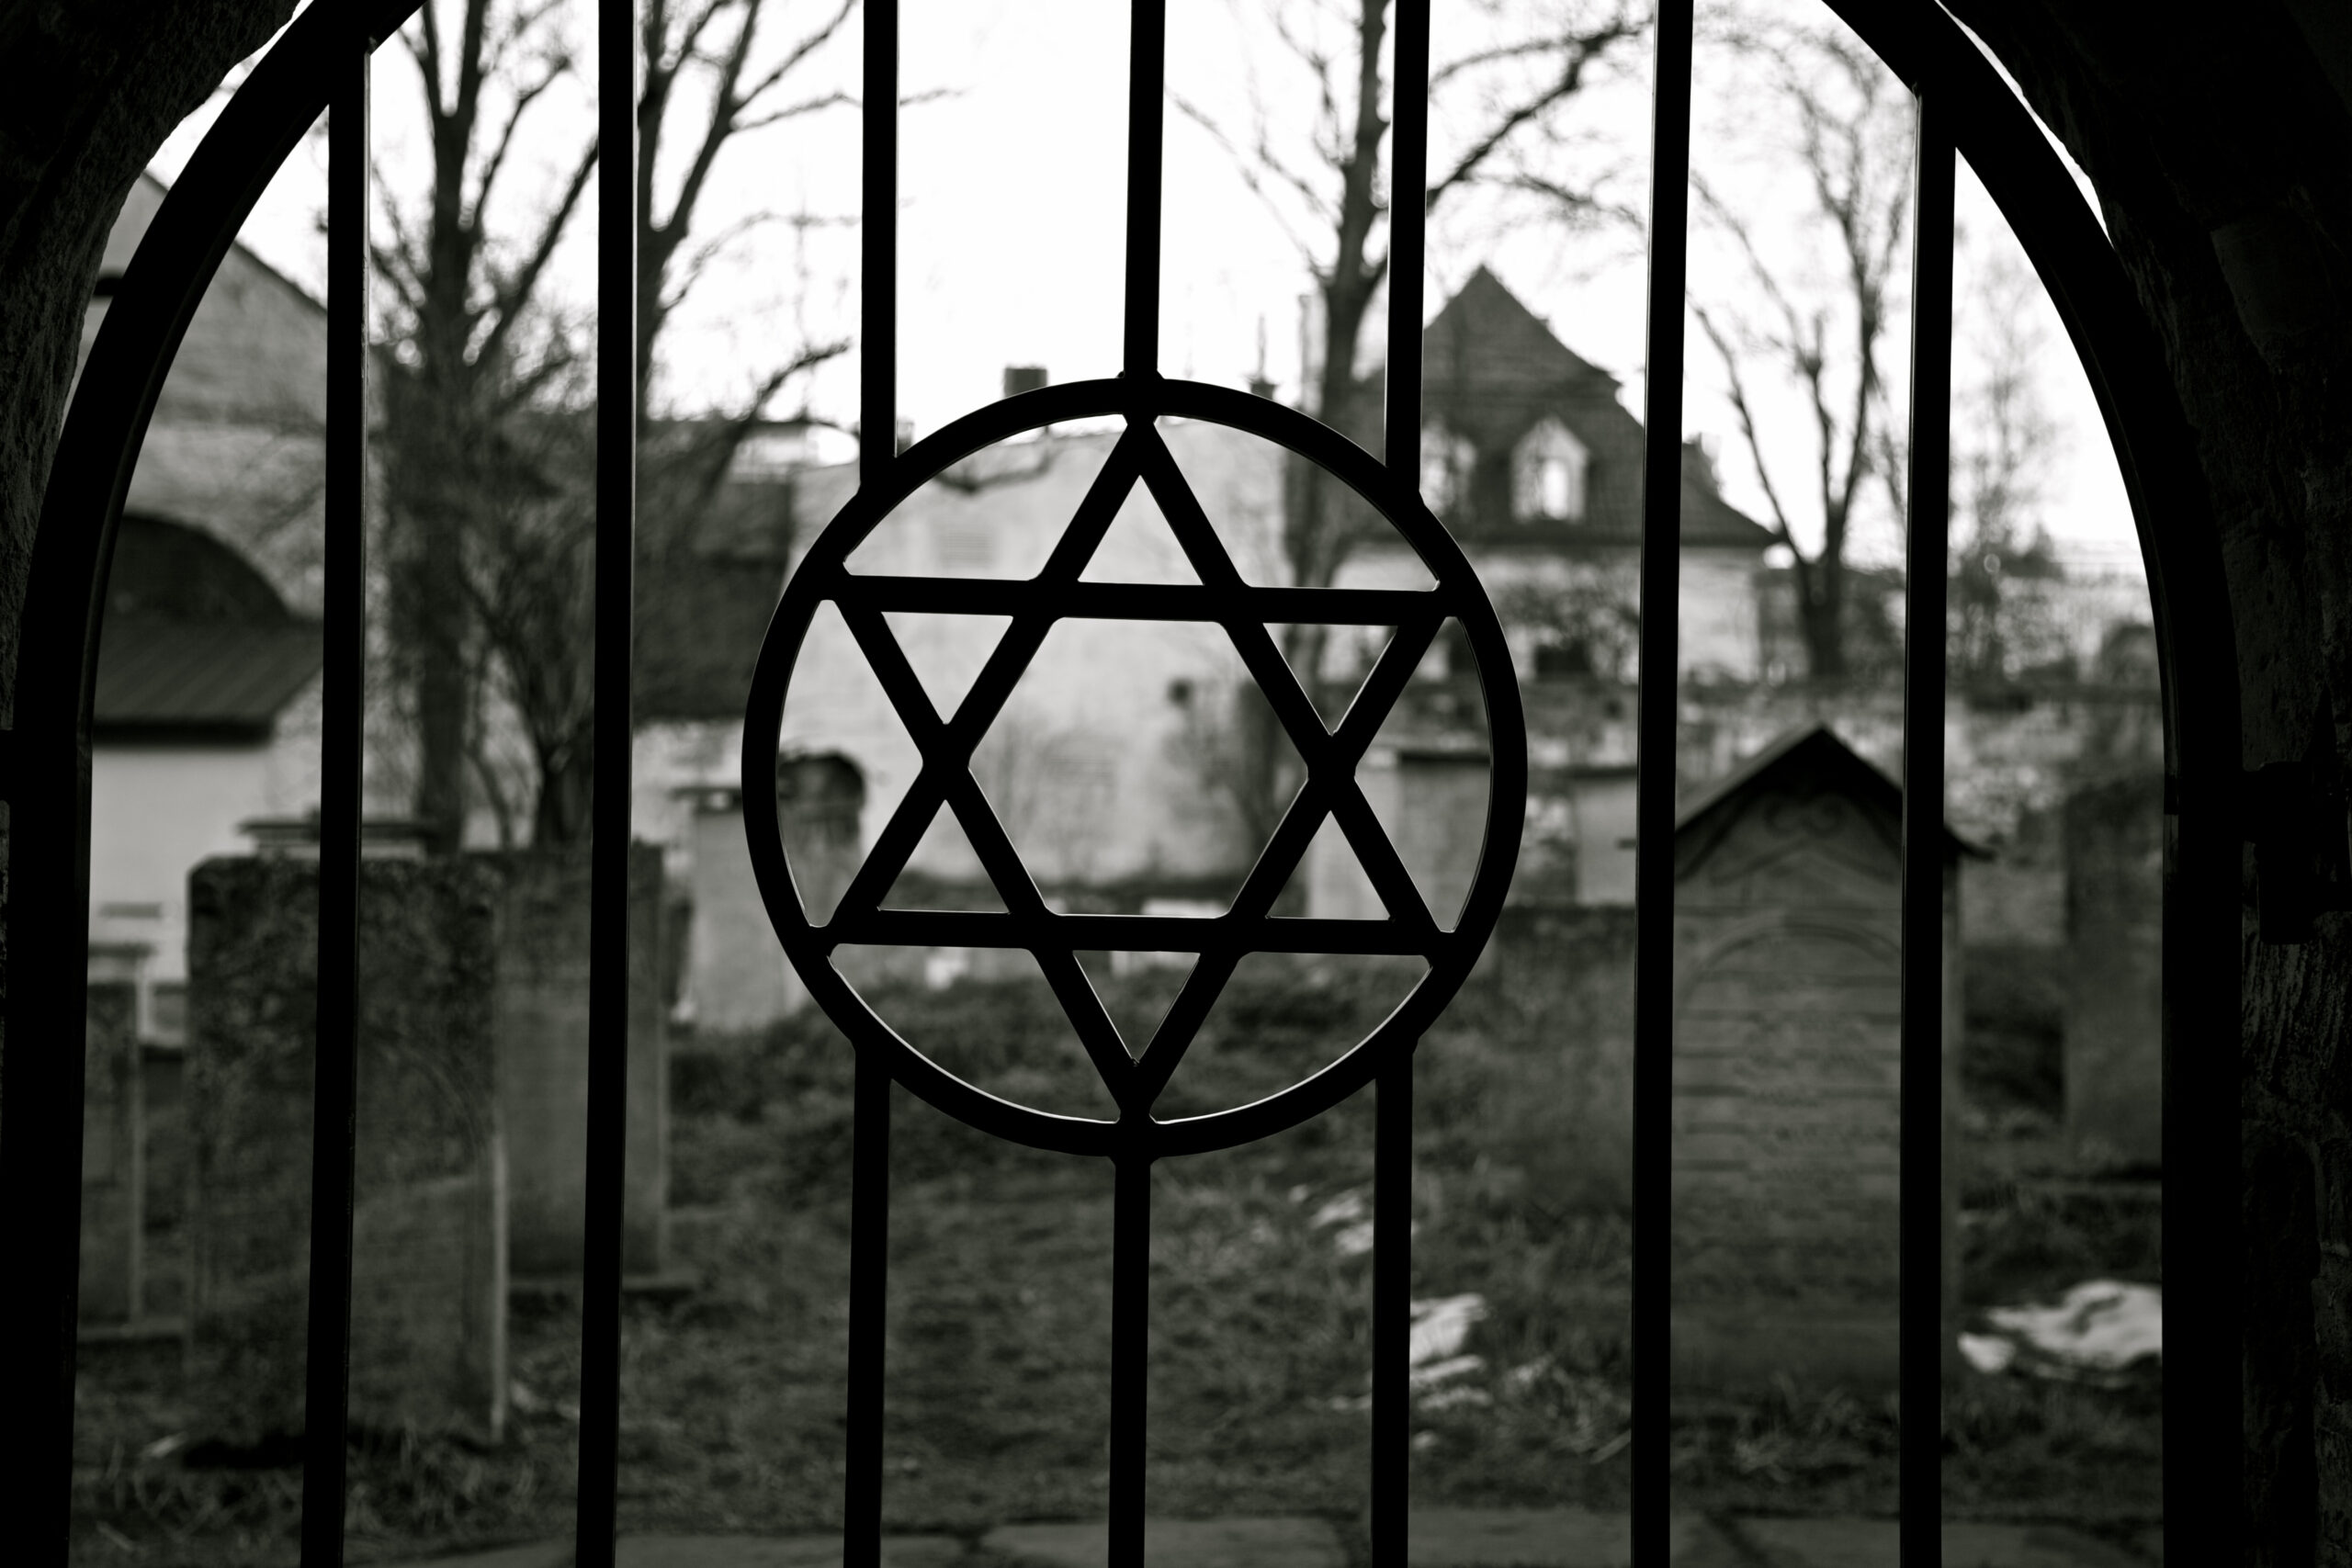 A metal gate featuring a Star of David